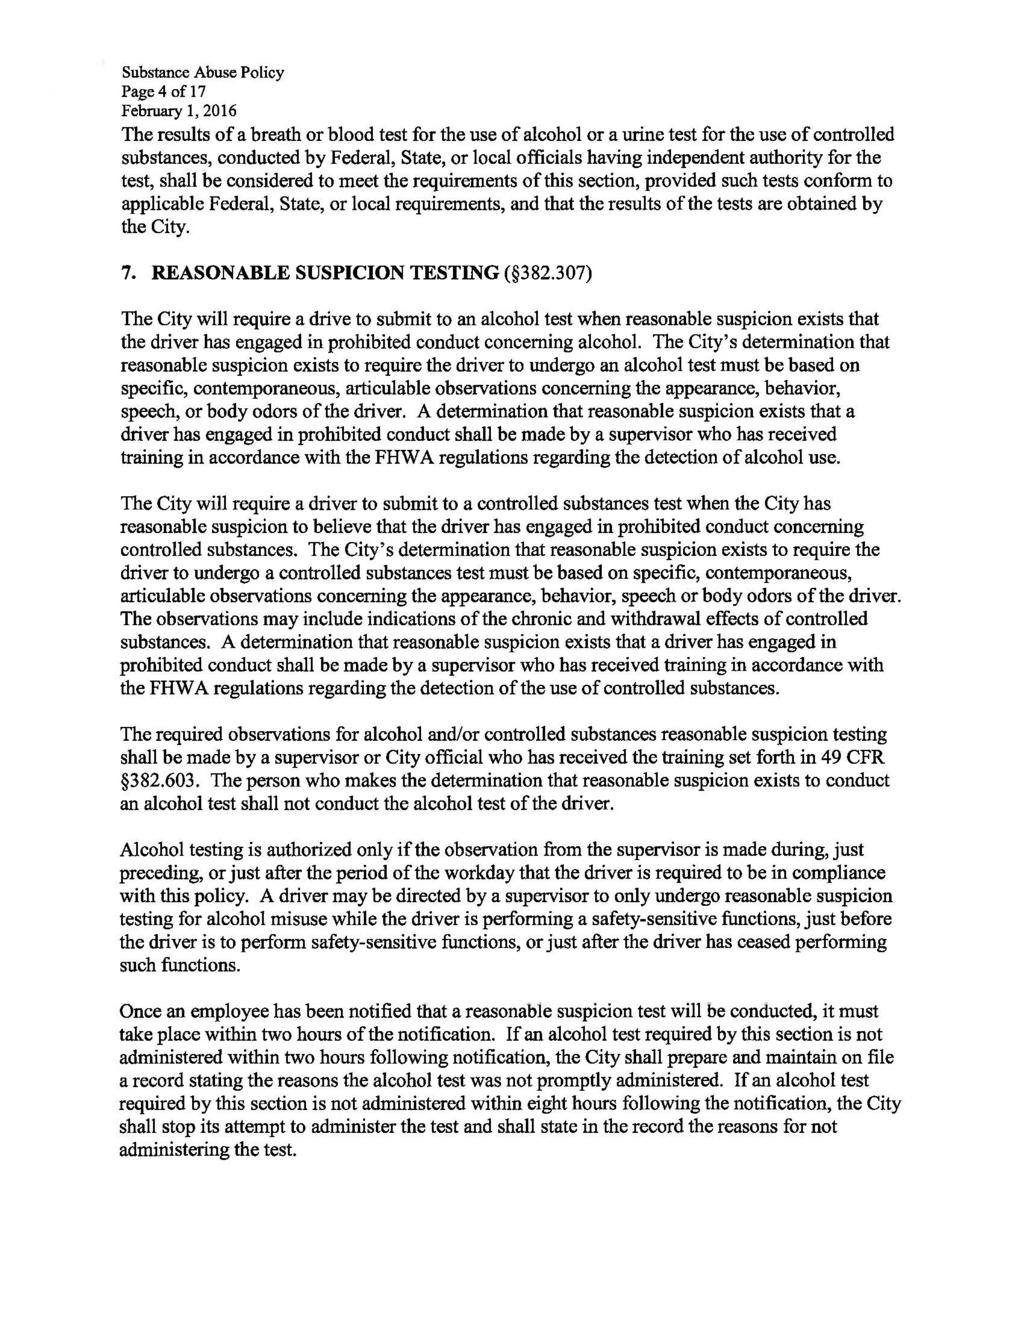 Page4 of17 The results of a breath or blood test for the use of alcohol or a urine test for the use of controlled substances, conducted by Federal, State, or local officials having independent